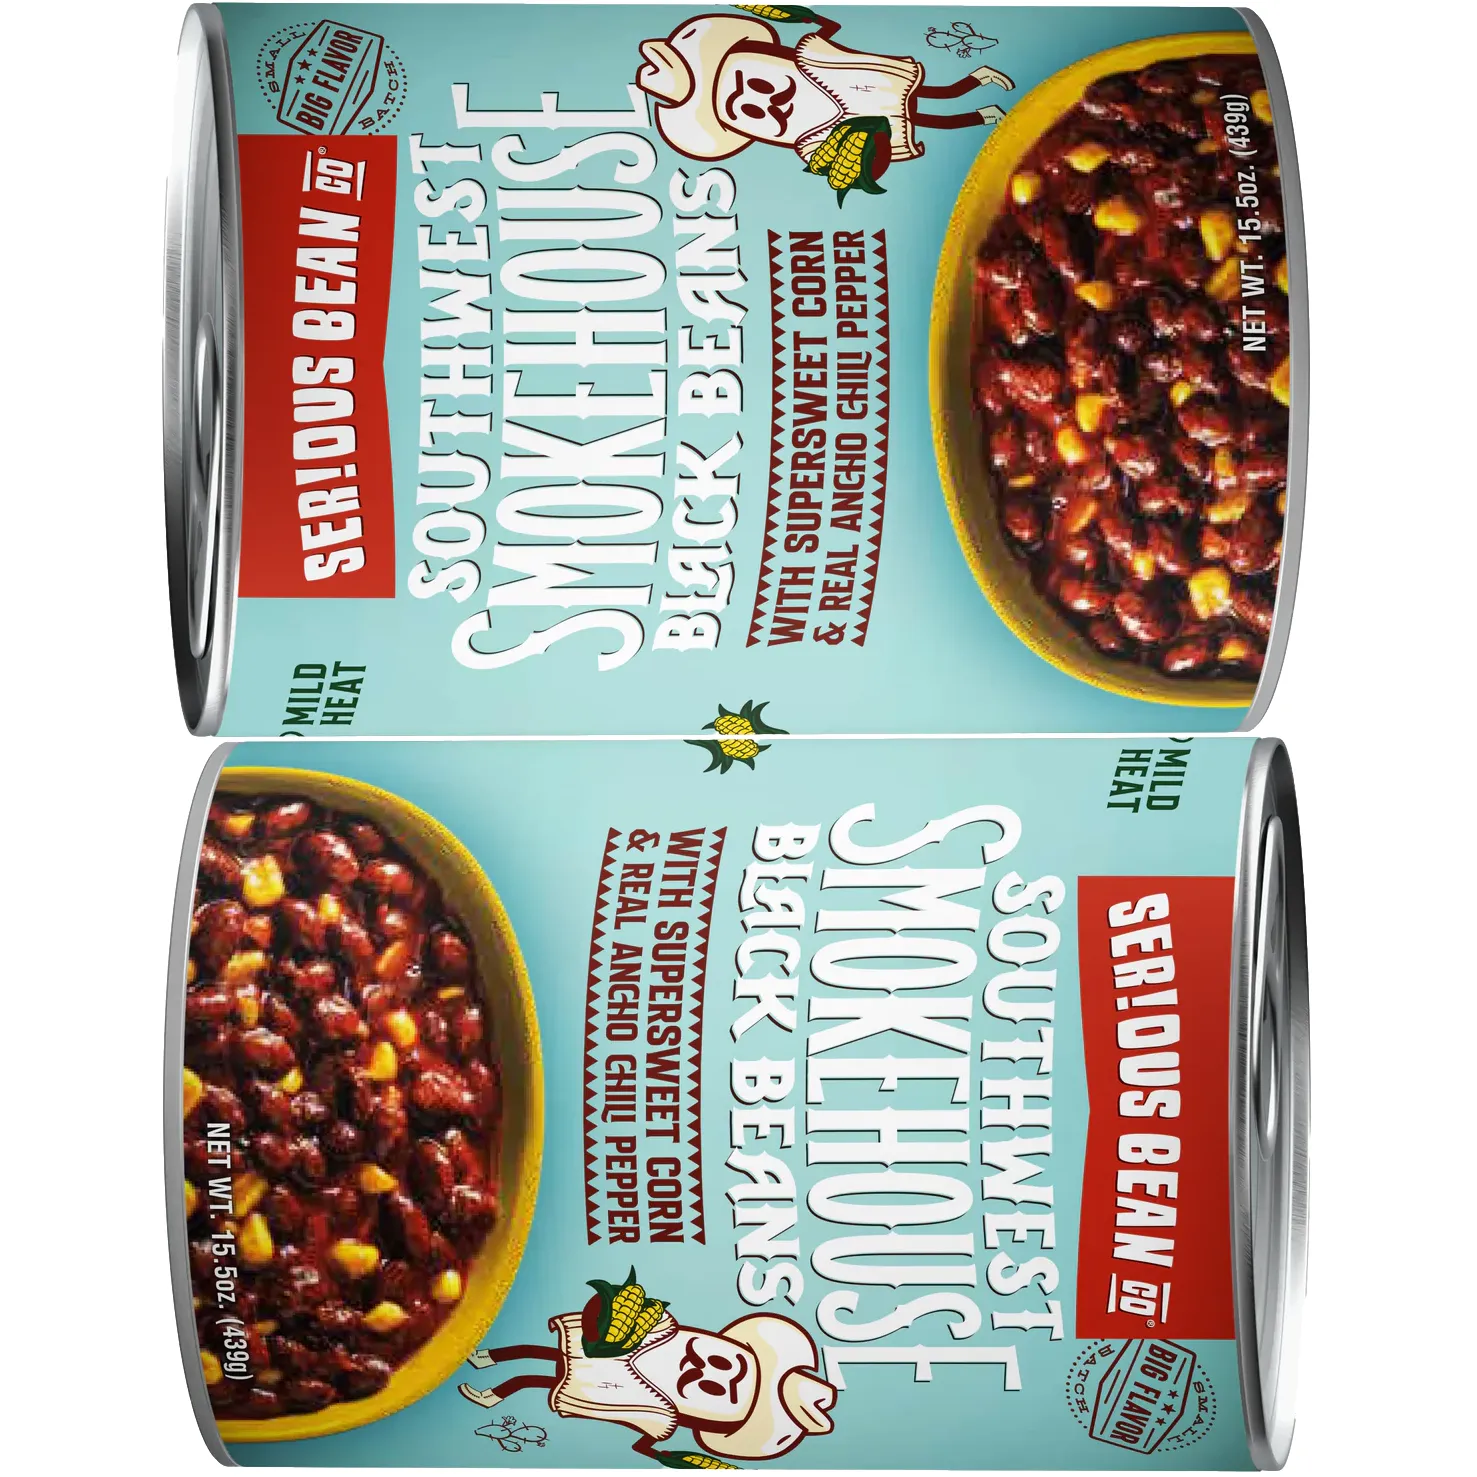 Free Can Of Serious Bean Co. Beans